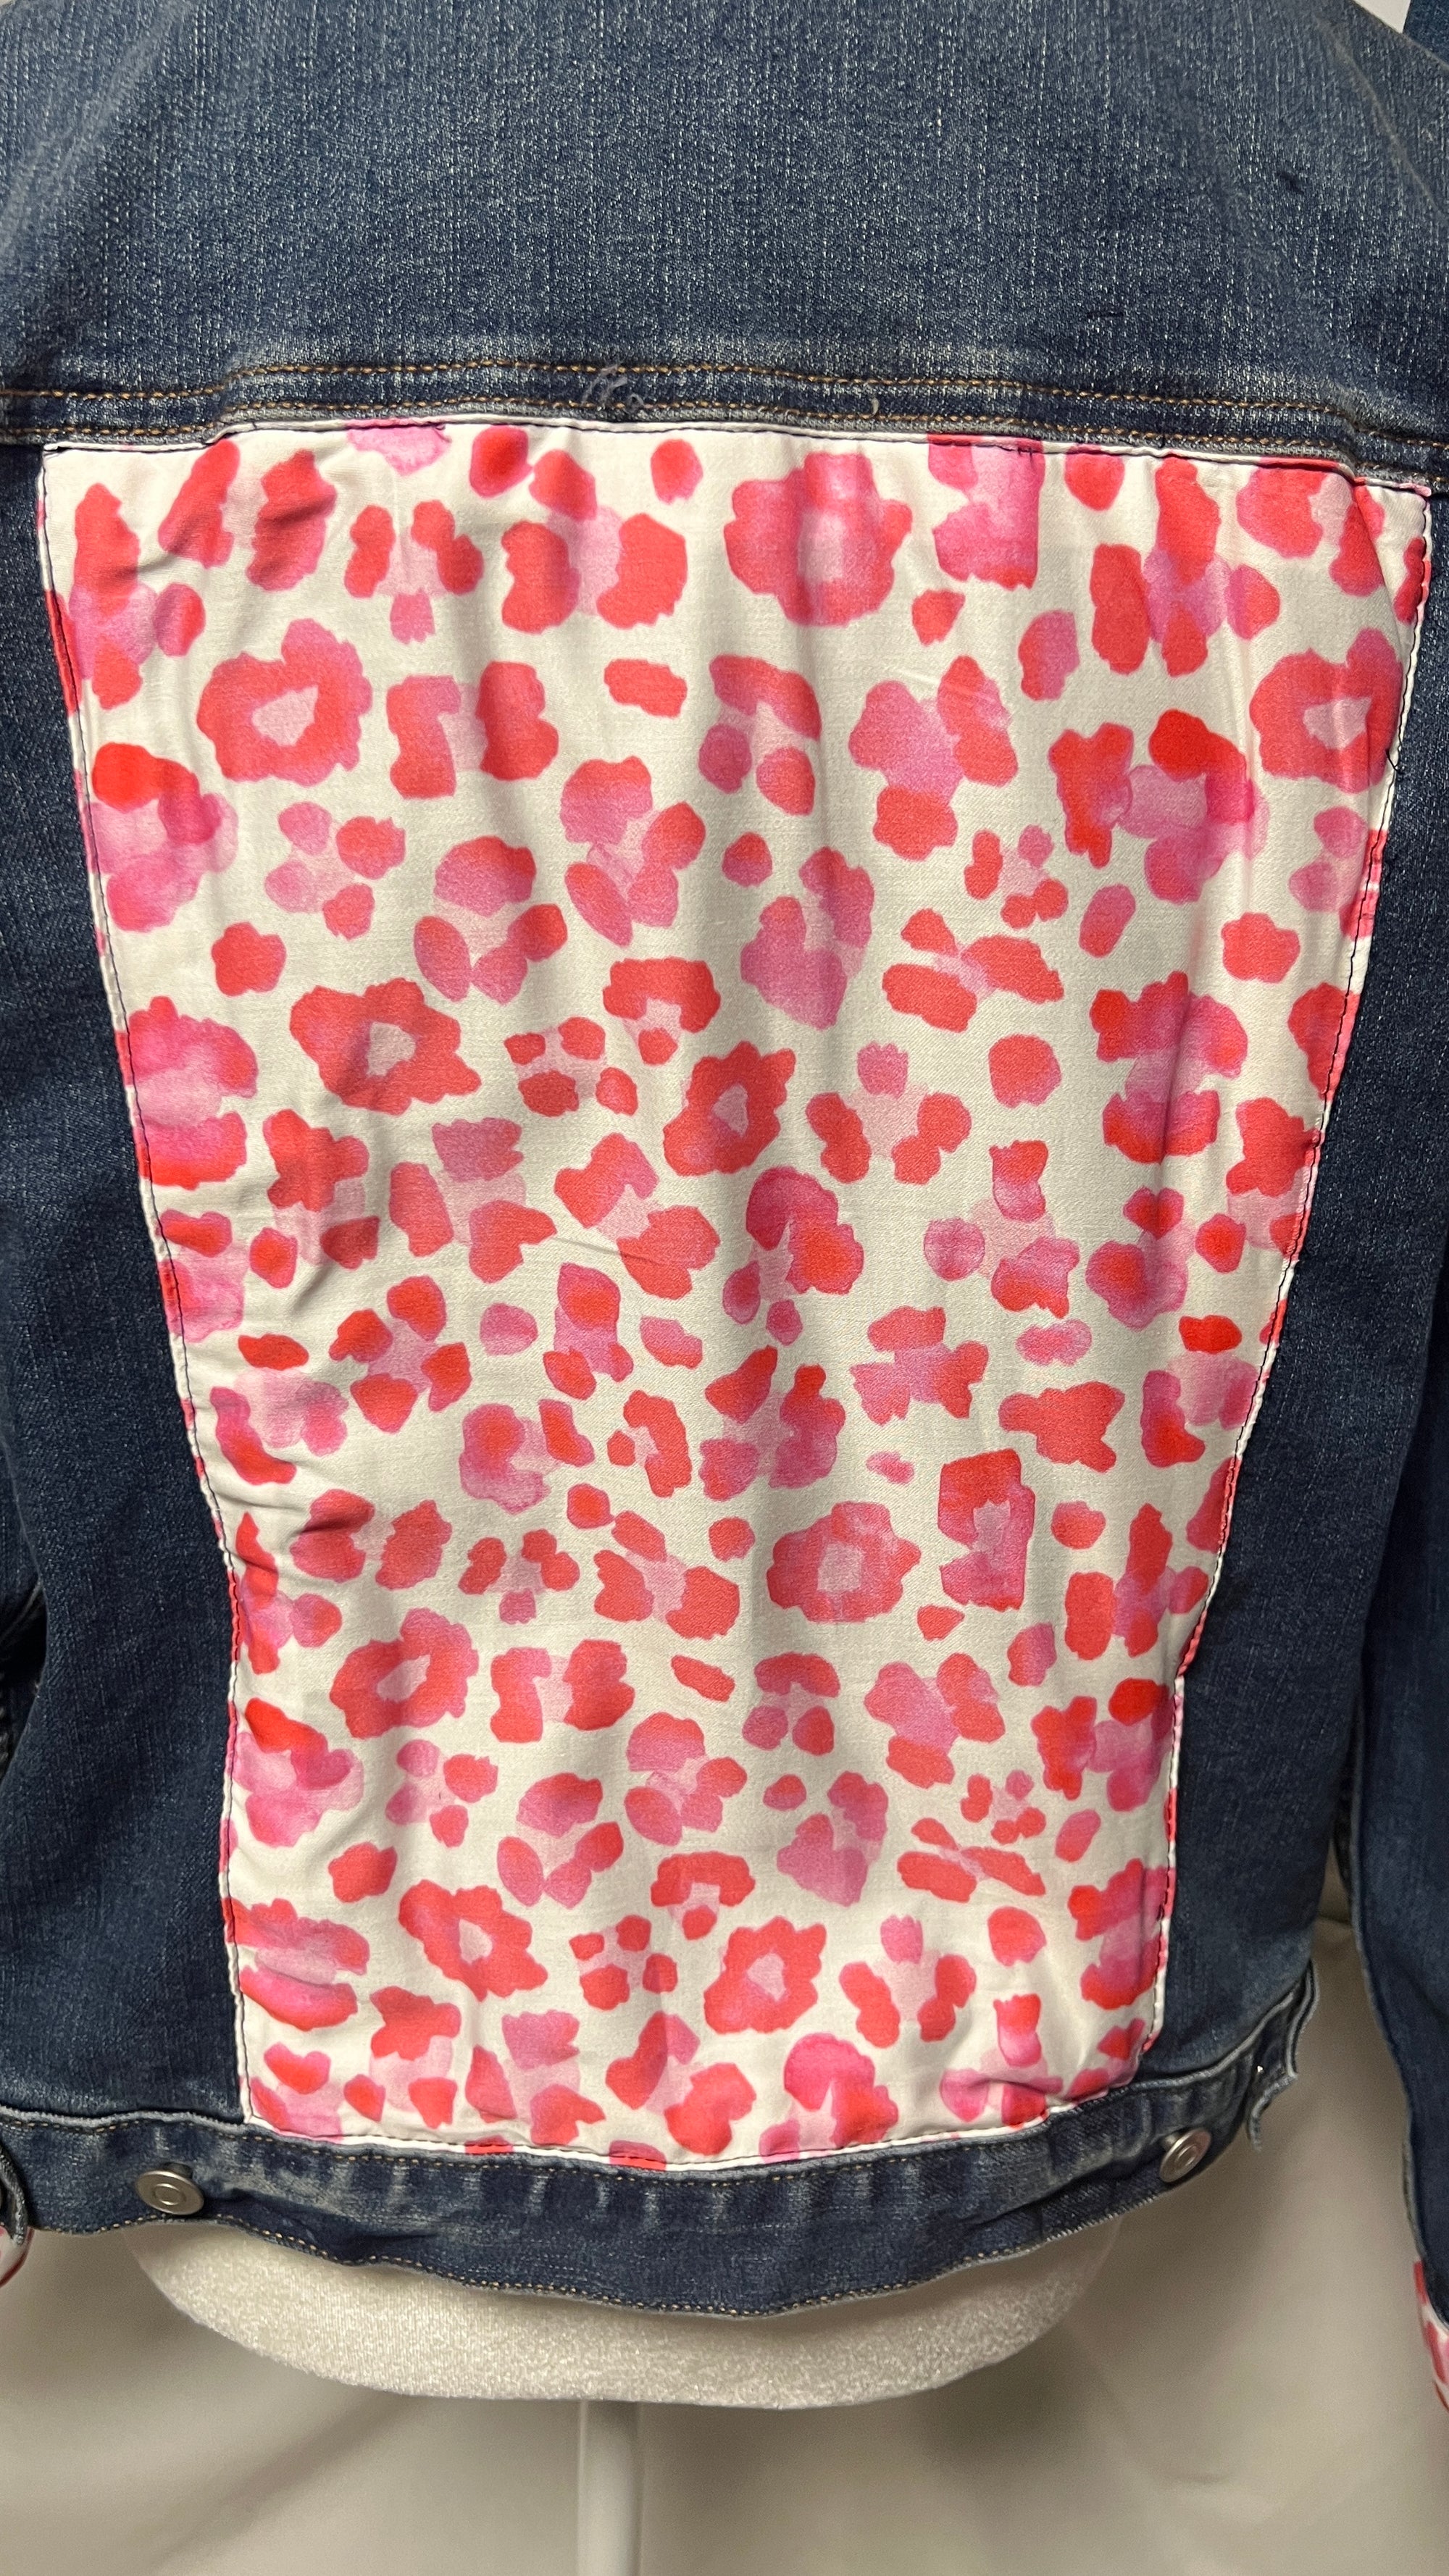 Hot Pink and White Leopard Print on Denim Jacket